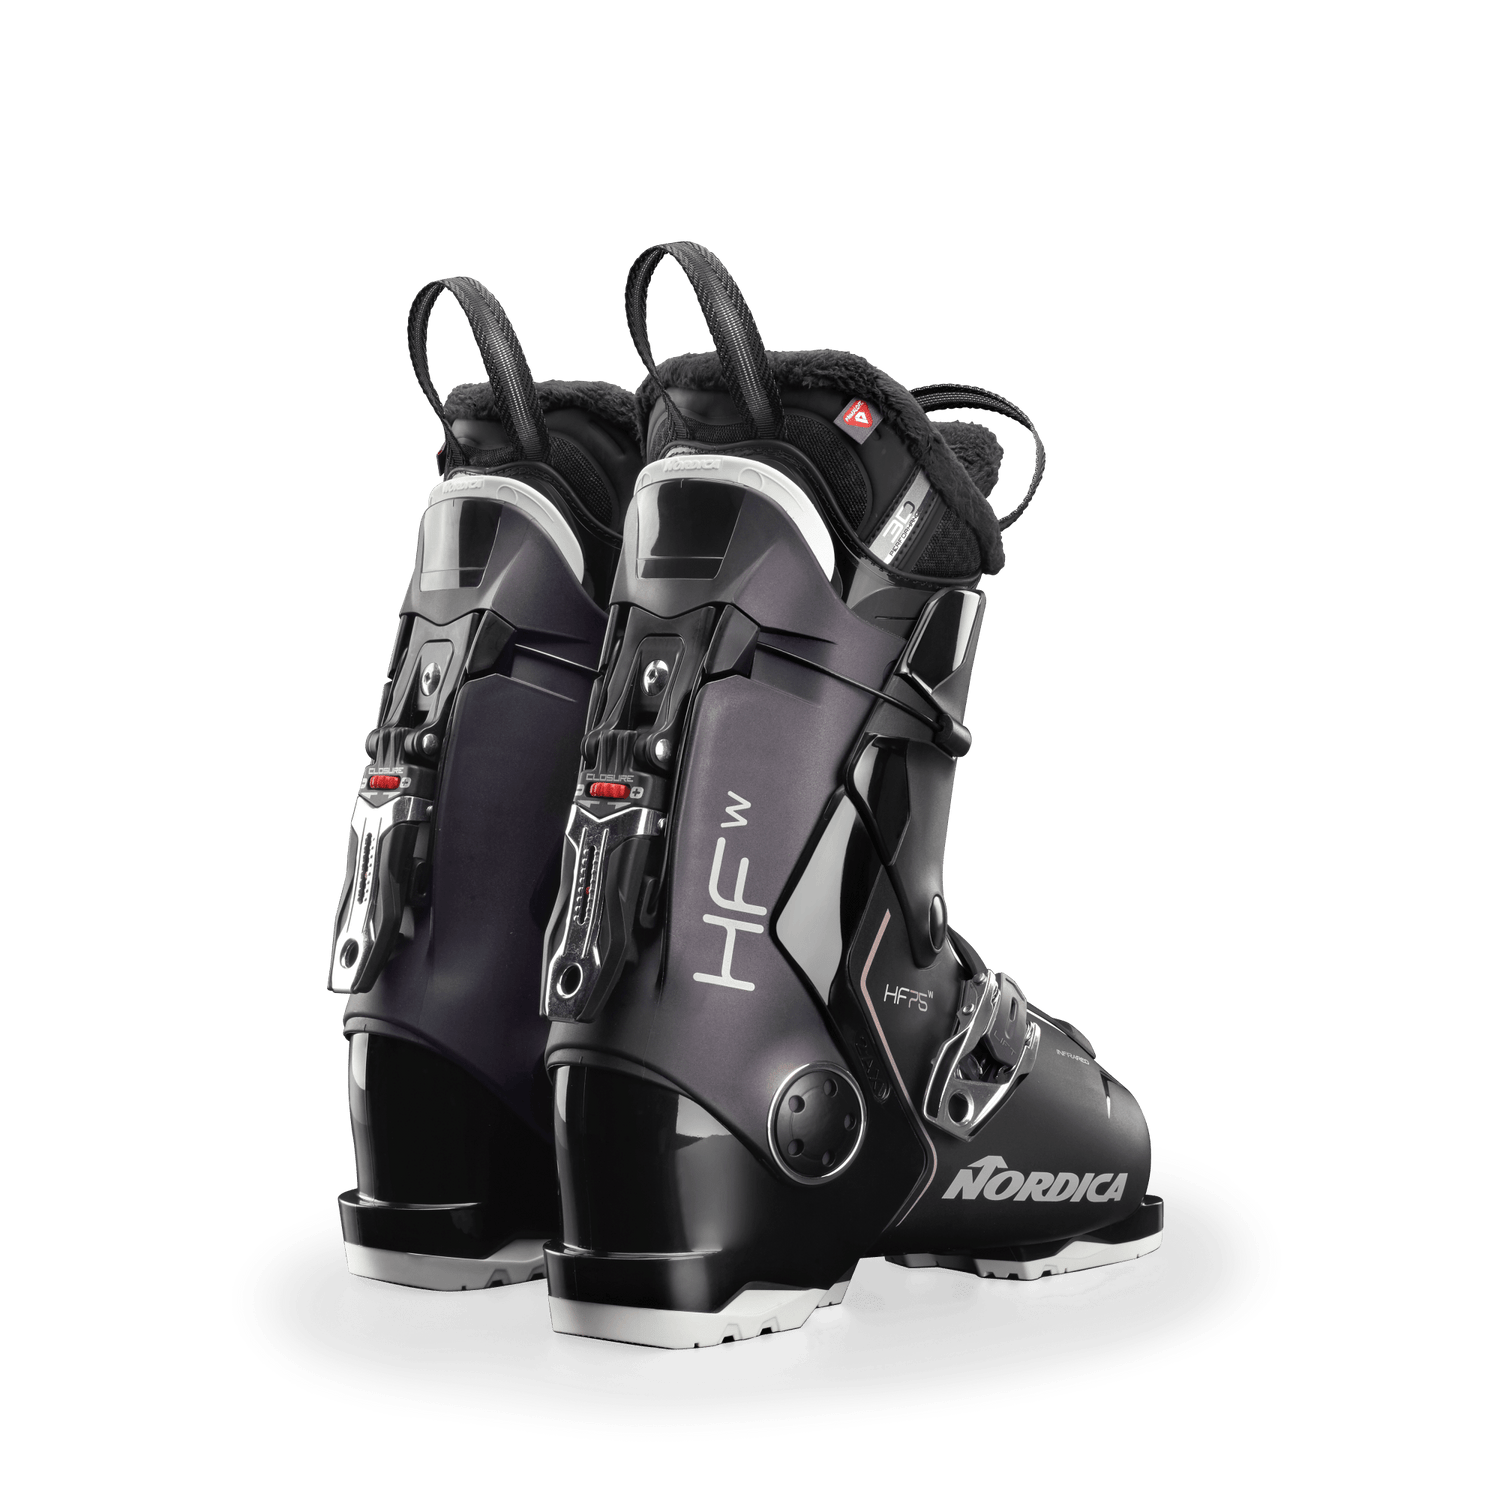 Back view of the Nordica HF 75 W alpine ski boots